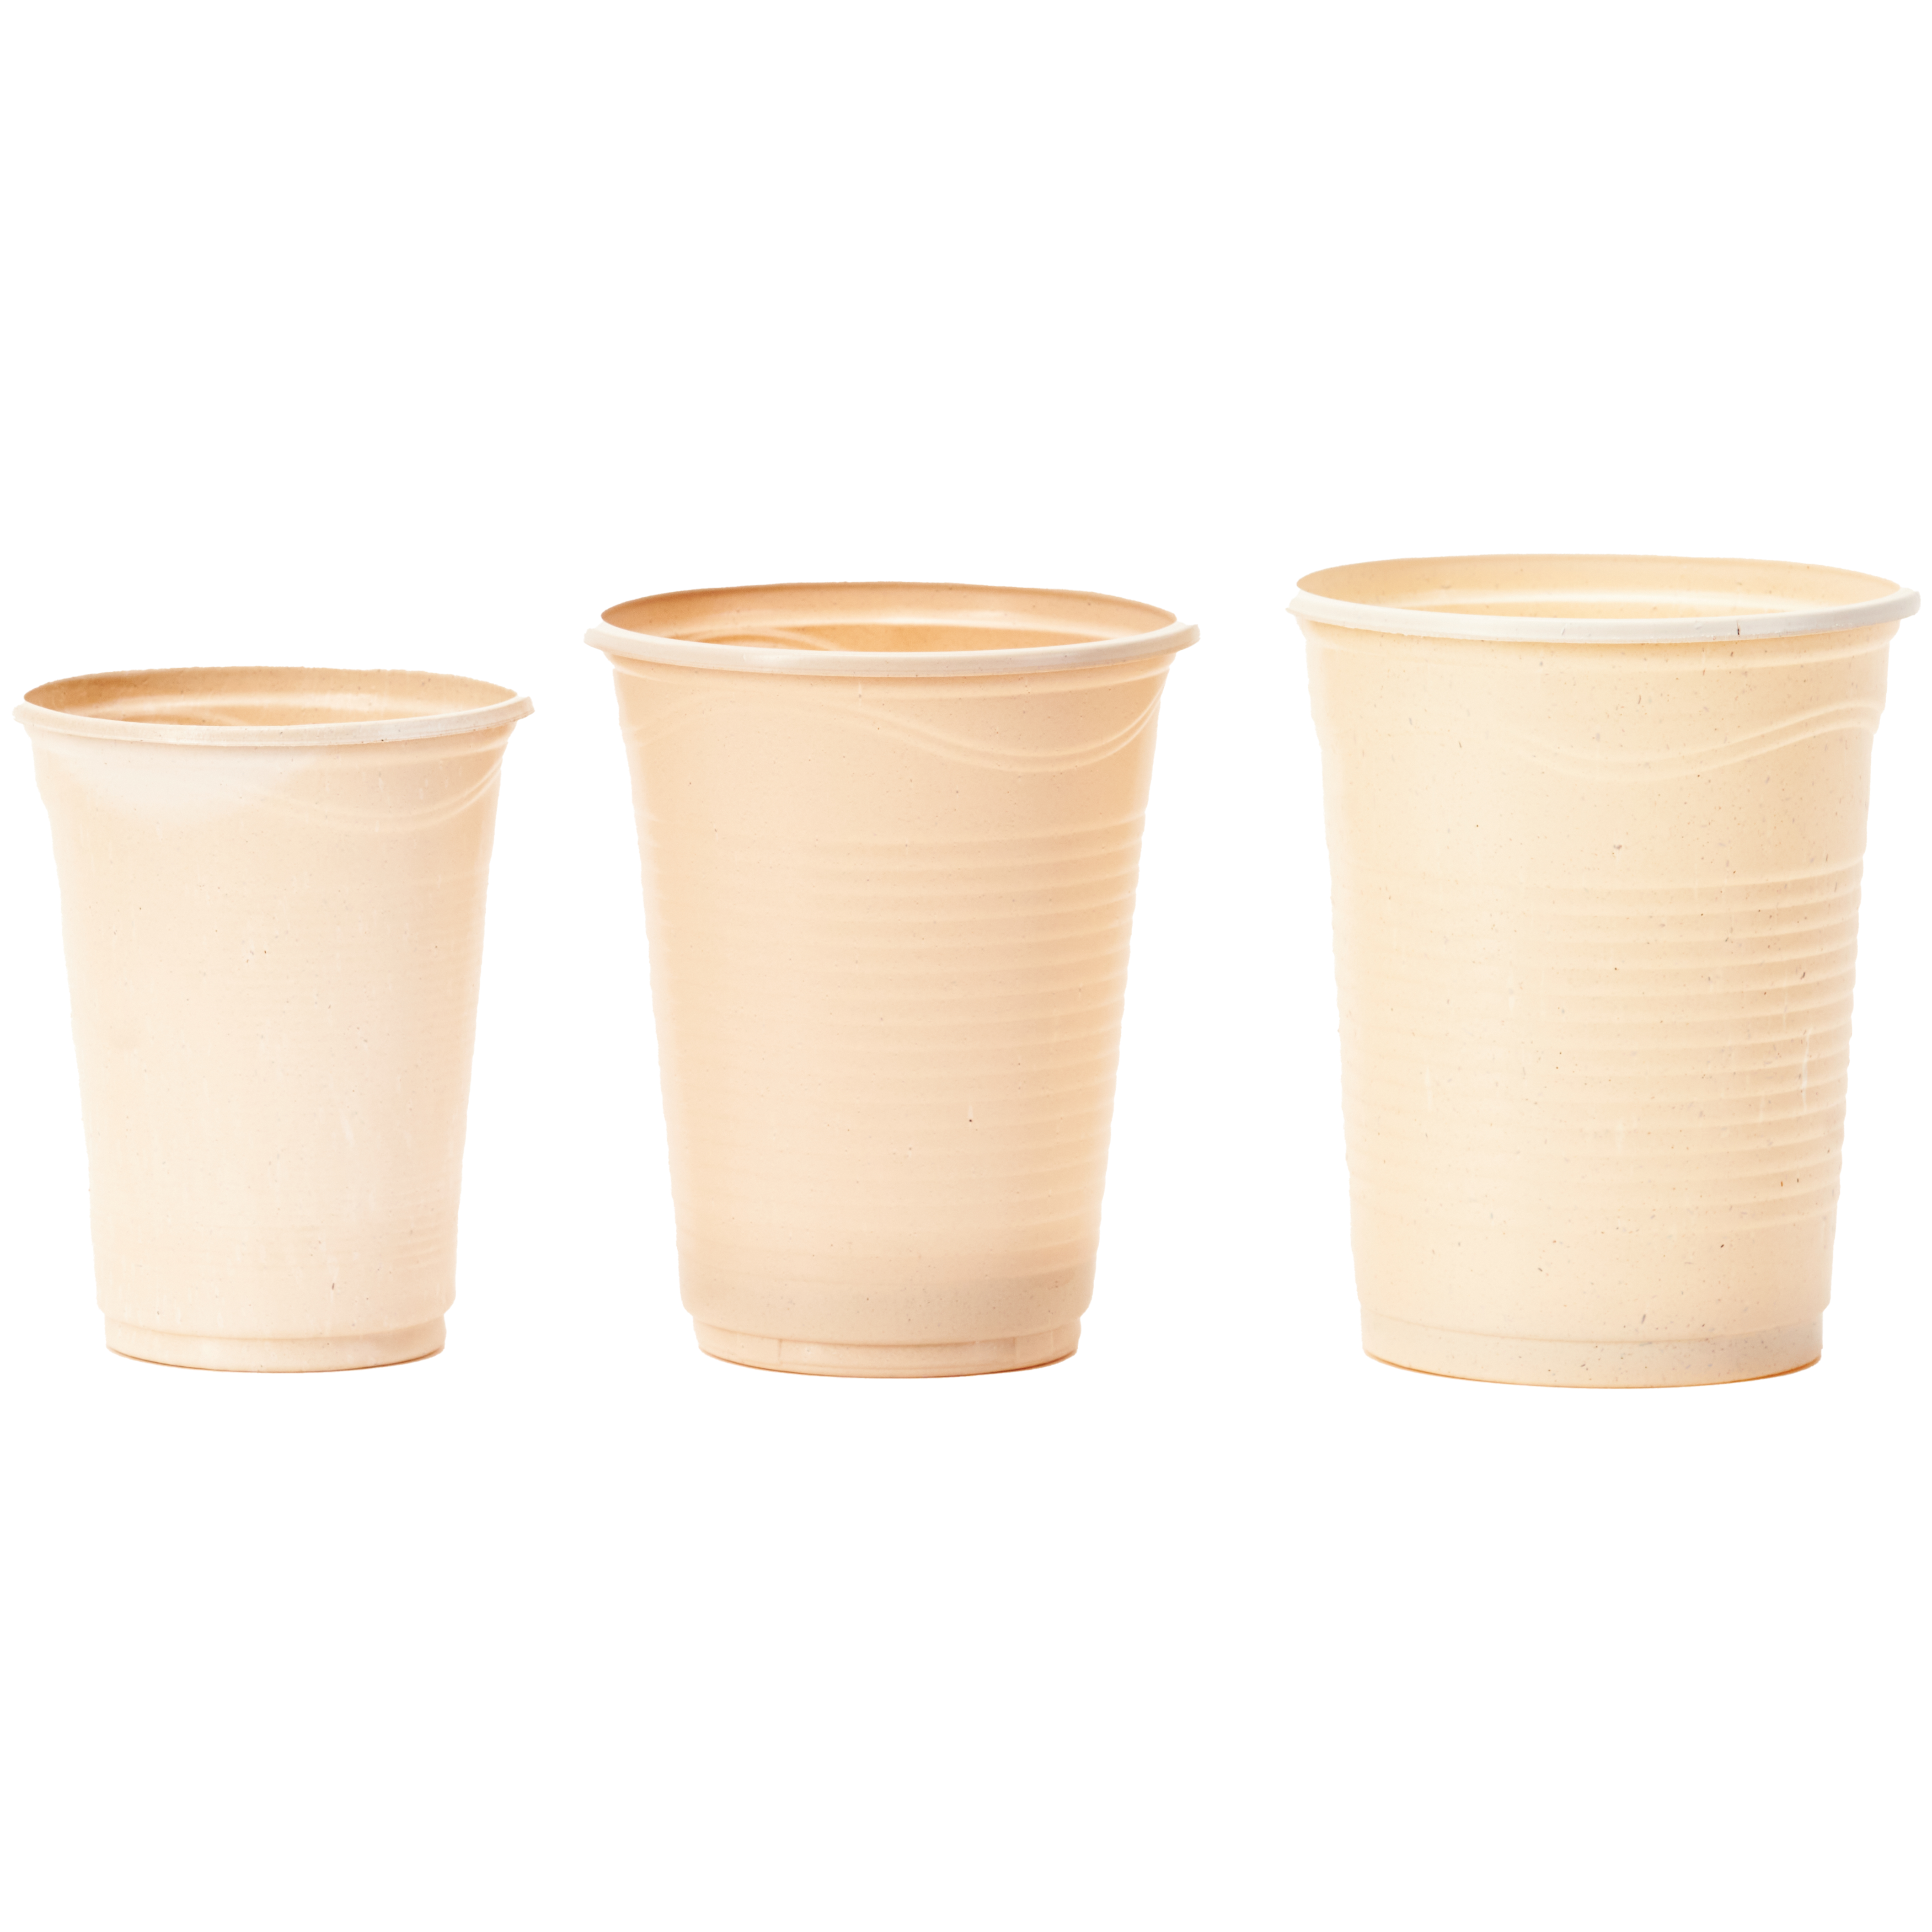 Sustainable Agave-Based Cups (Beige)